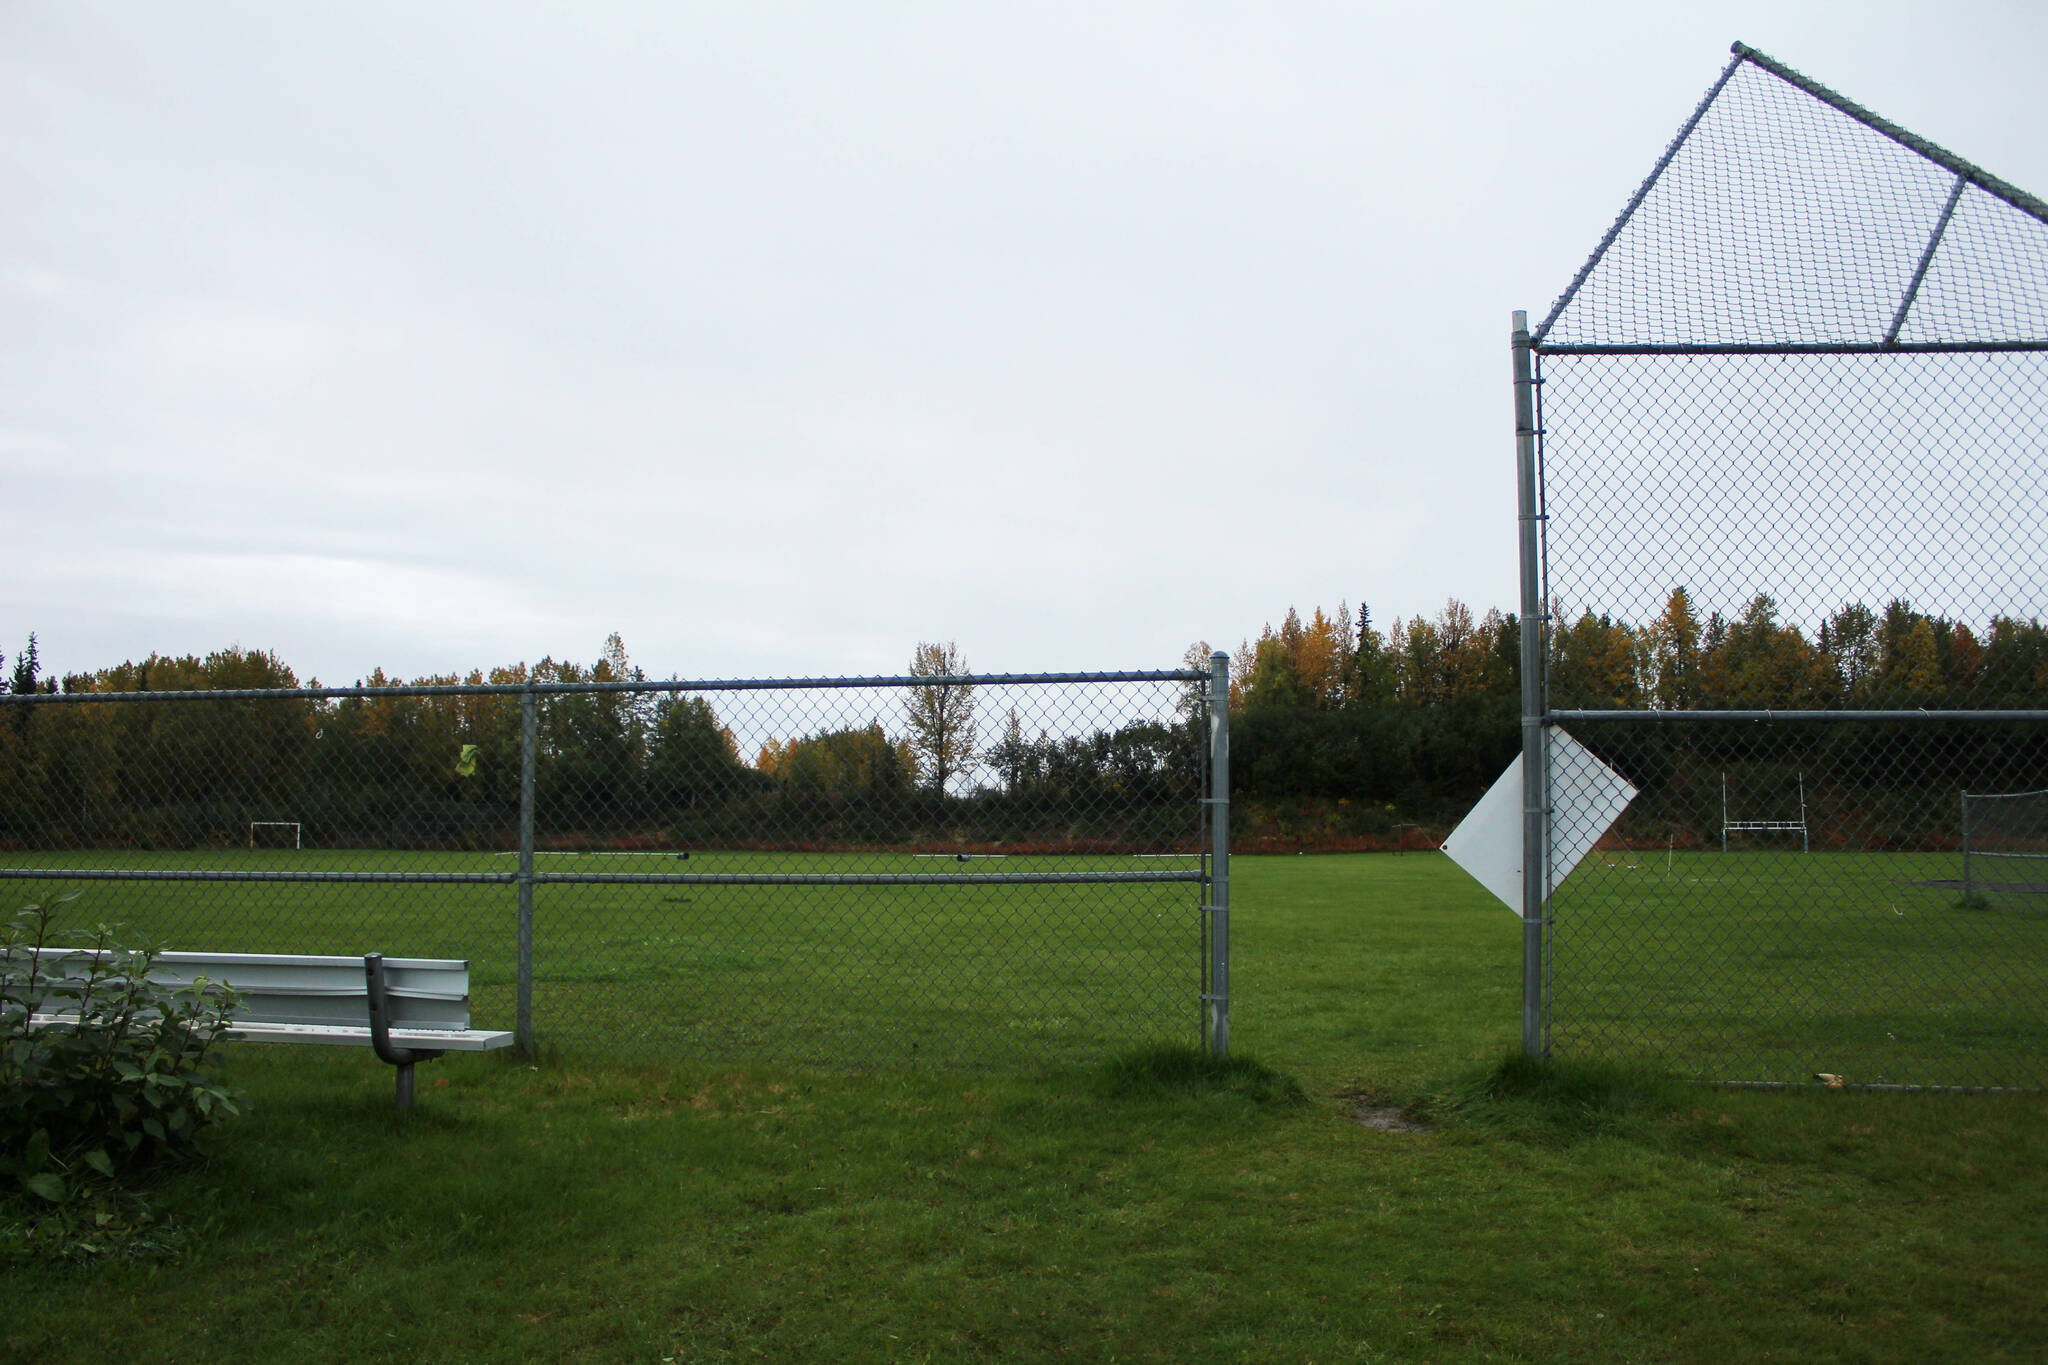 Fencing surrounds the upper fields at Nikiski Middle/High School on Monday, Sept. 19, 2022. The field is the proposed relocation site of the school’s track and field, which is part of a bond package Kenai Peninsula Borough voters will consider next month. (Ashlyn O’Hara/Peninsula Clarion)